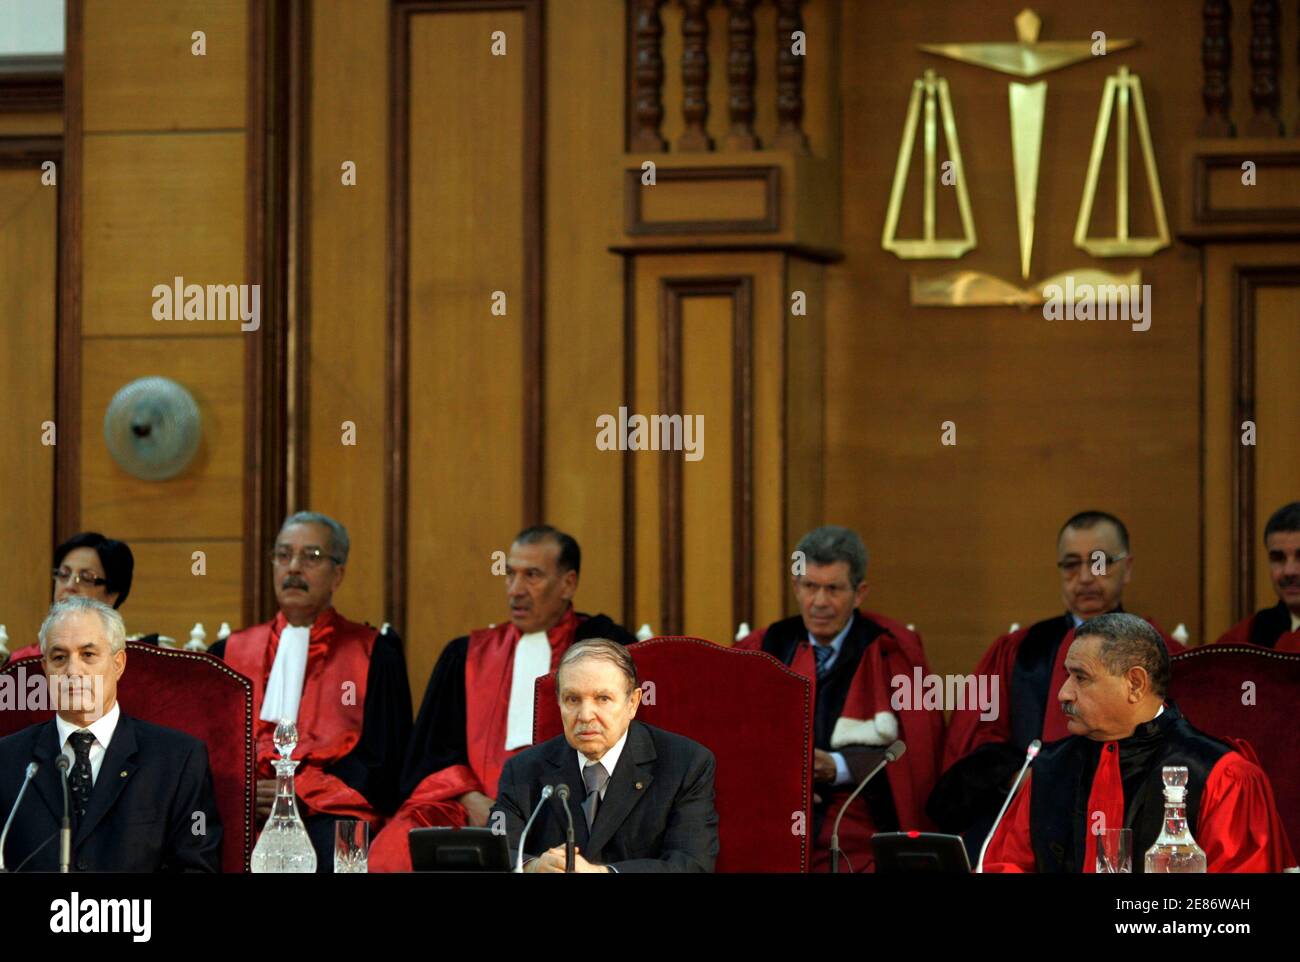 Algeria's President  Abdelaziz Bouteflika (C) gives a speech during opening the ceremony of judiciary year at supreme court in Algiers October 29, 2008. President Abdelaziz Bouteflika, reaching the end of his second and final term, said on Wednesday he wanted to alter Algeria's constitution in a manner several analysts interpreted as meaning he intends to stay on. REUTERS/Louafi Larbi (ALGERIA) Stock Photo